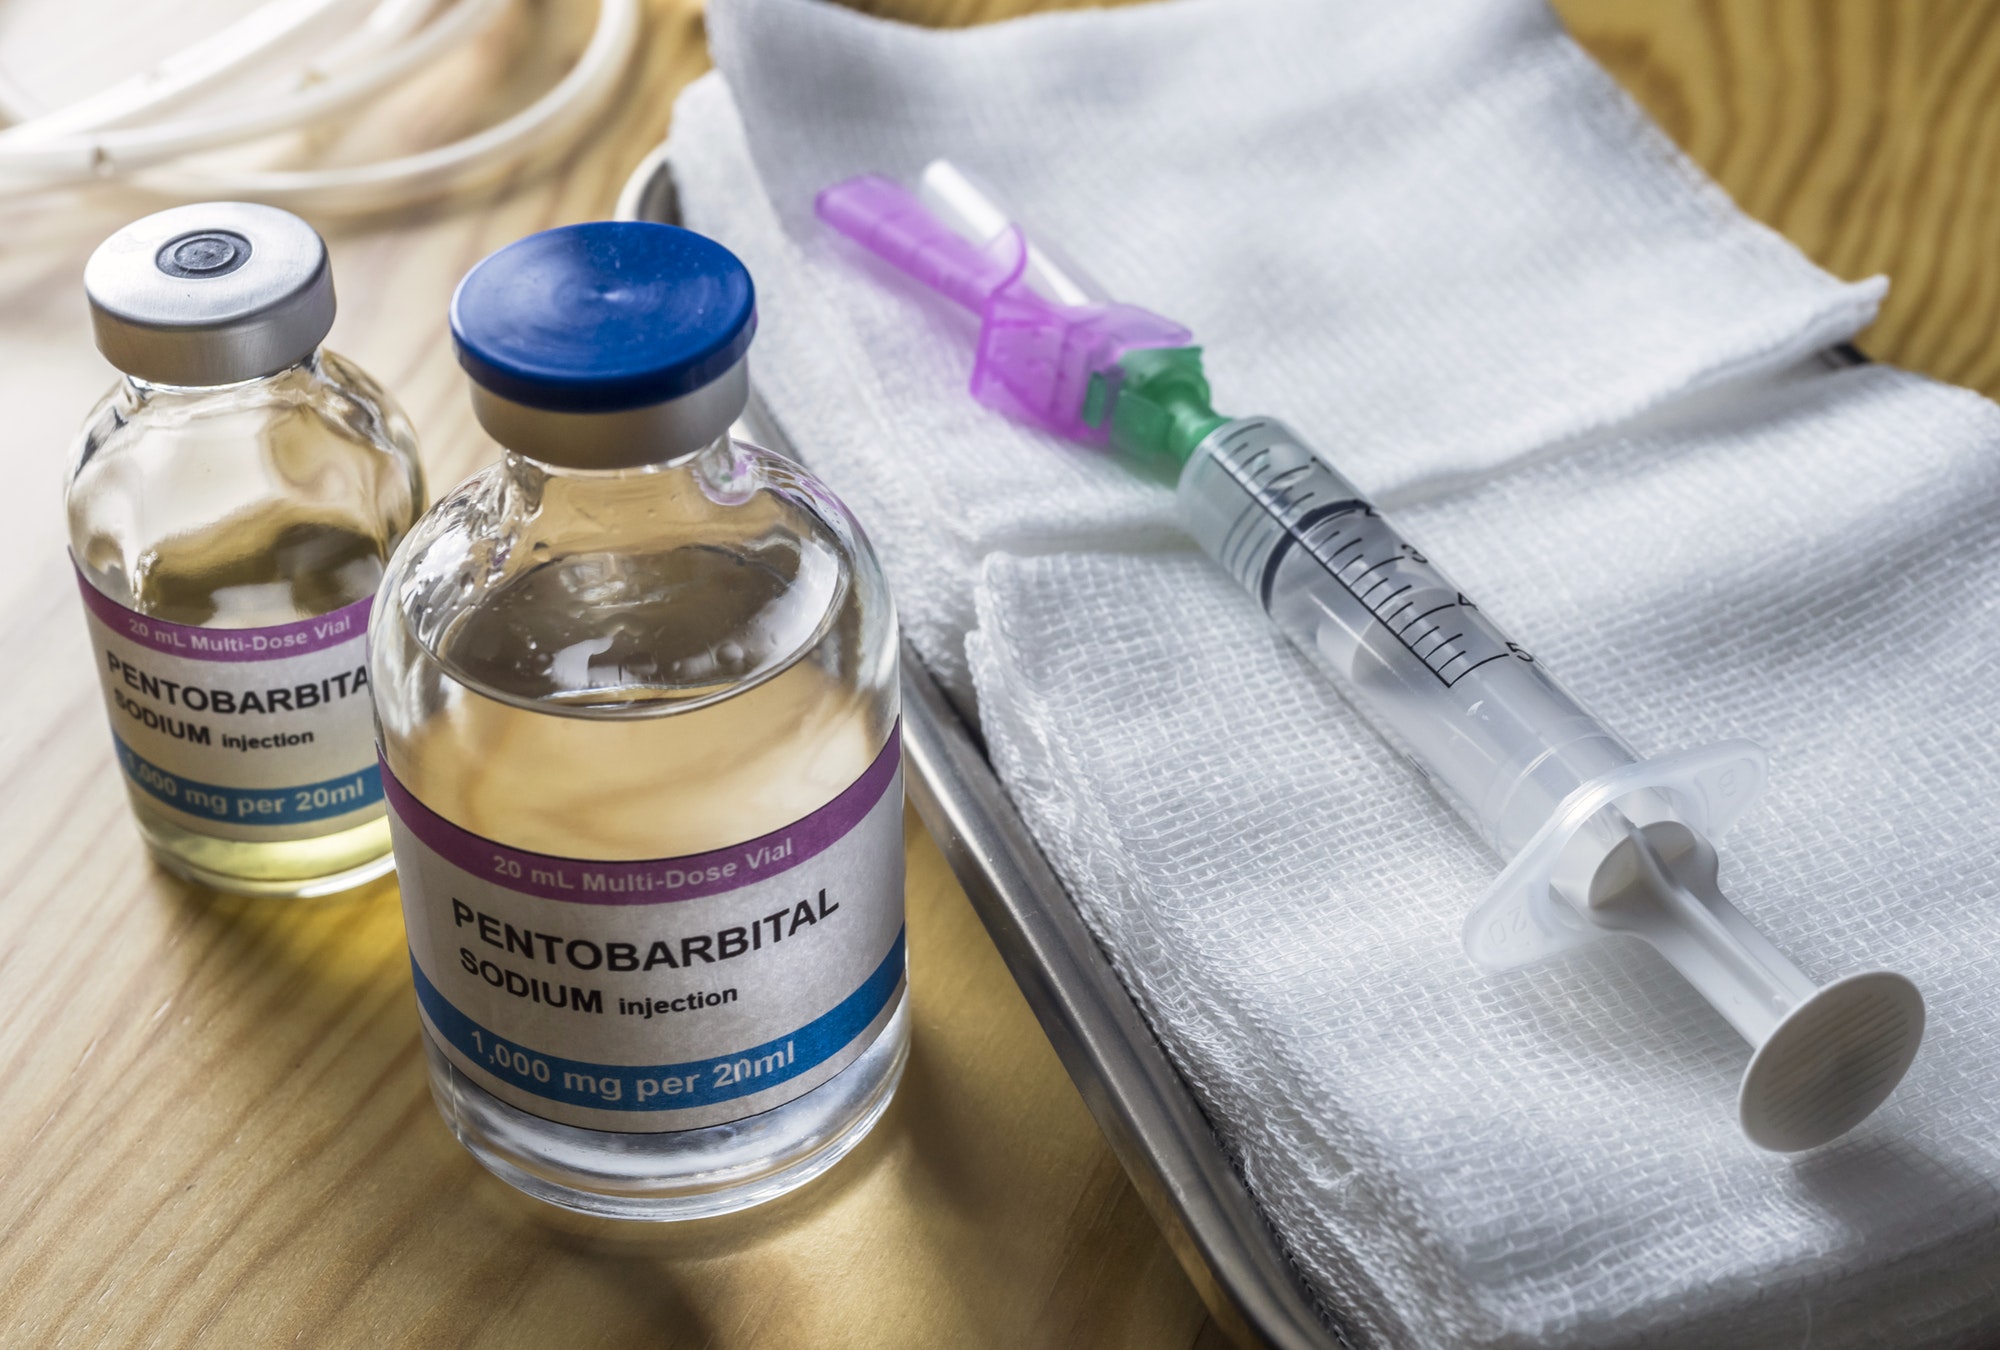 Vial with pentobarbital Sodium injection used for euthanasia